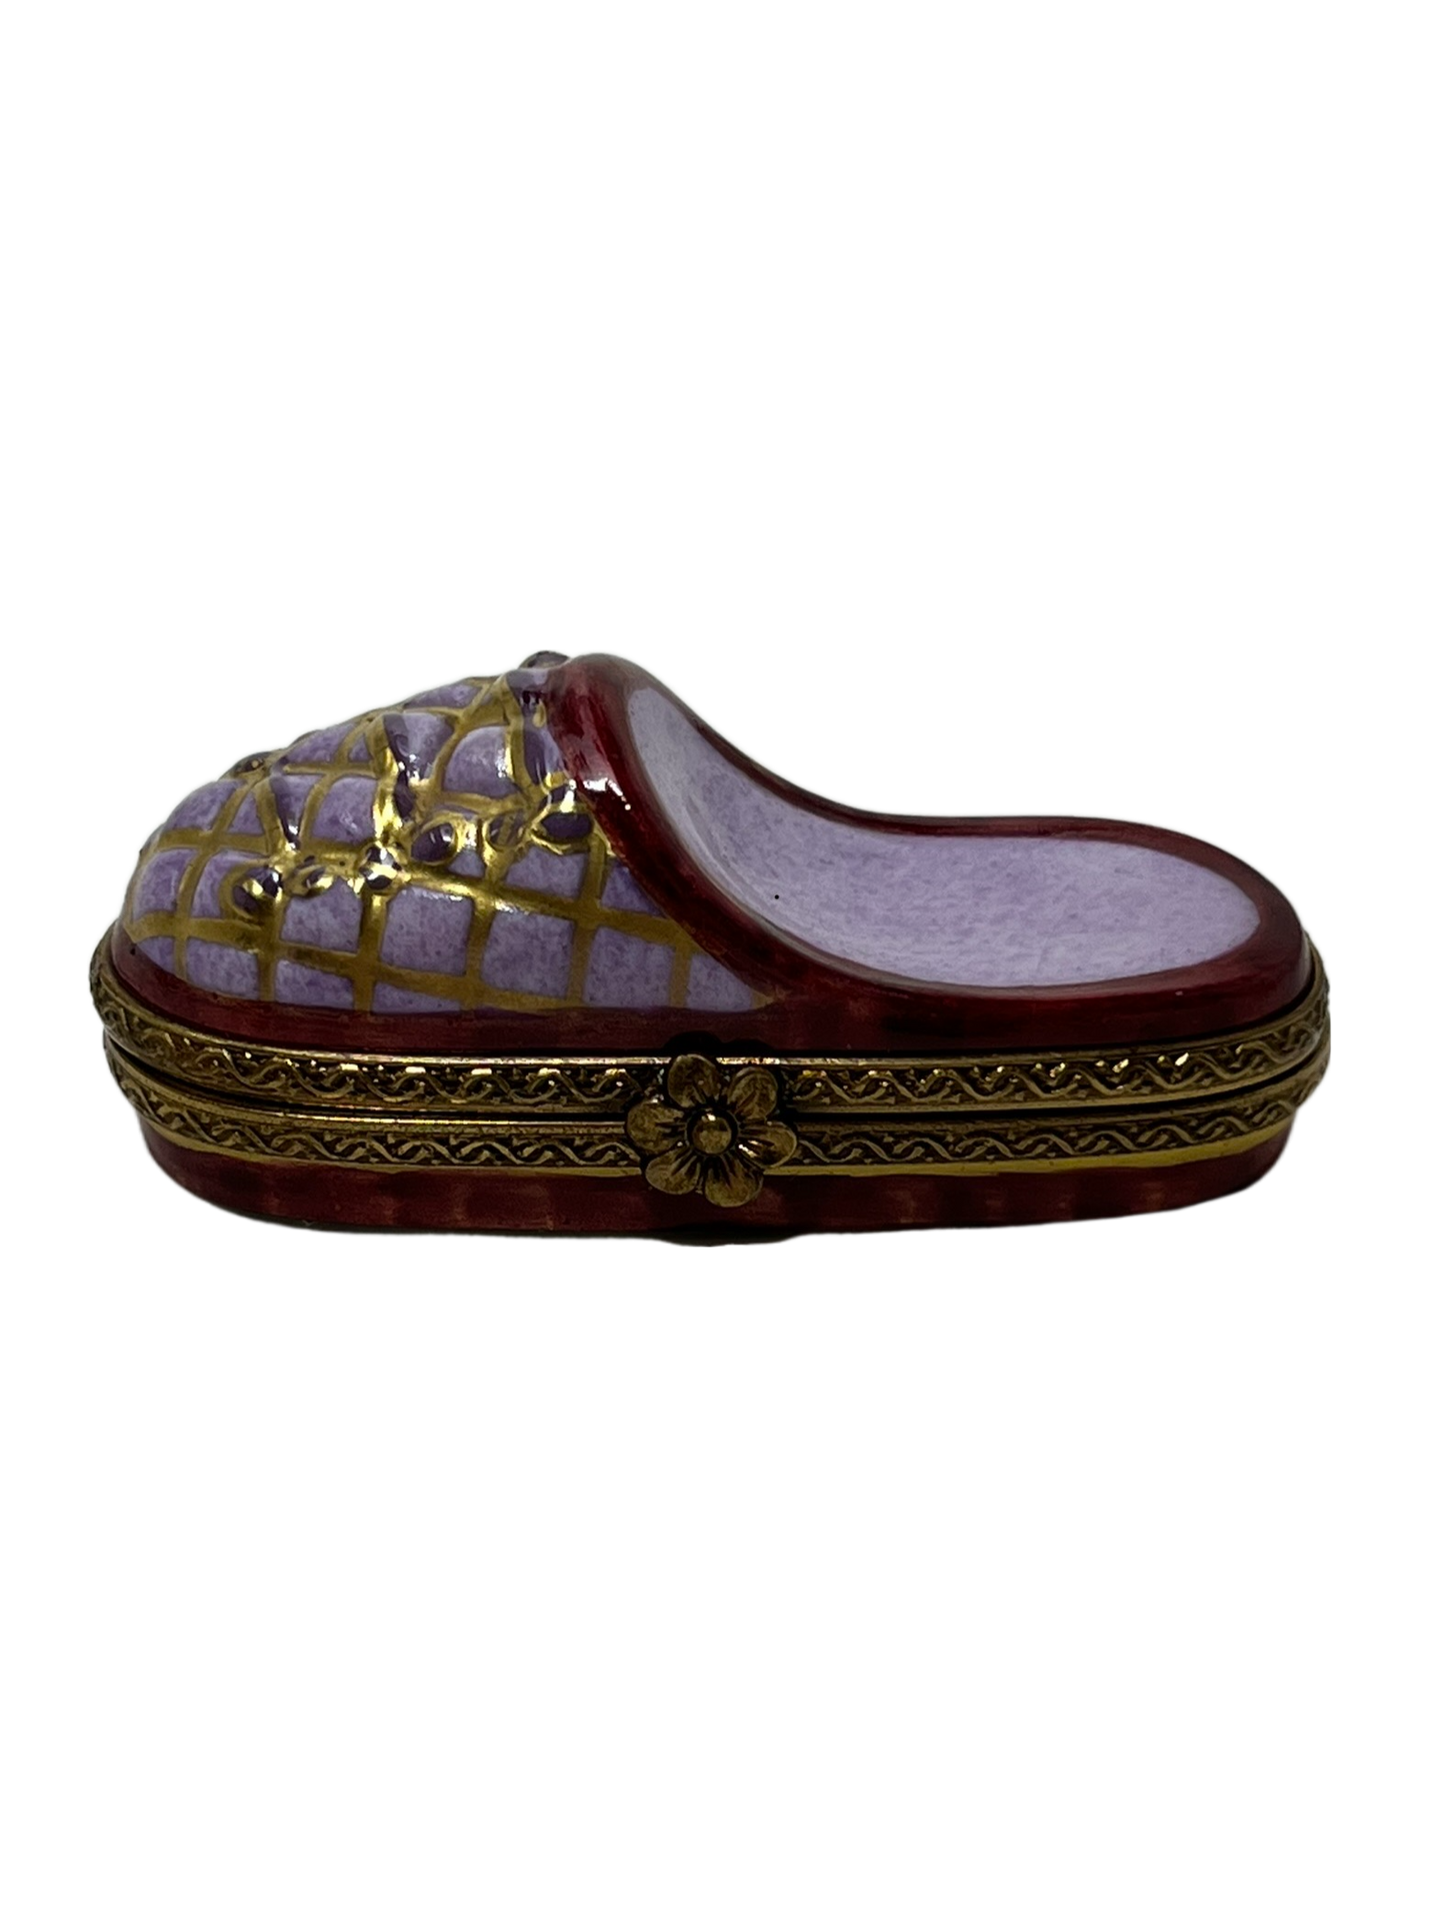 Regal Stride: Limoges Box - Purple, Maroon, and Gold Flipflop